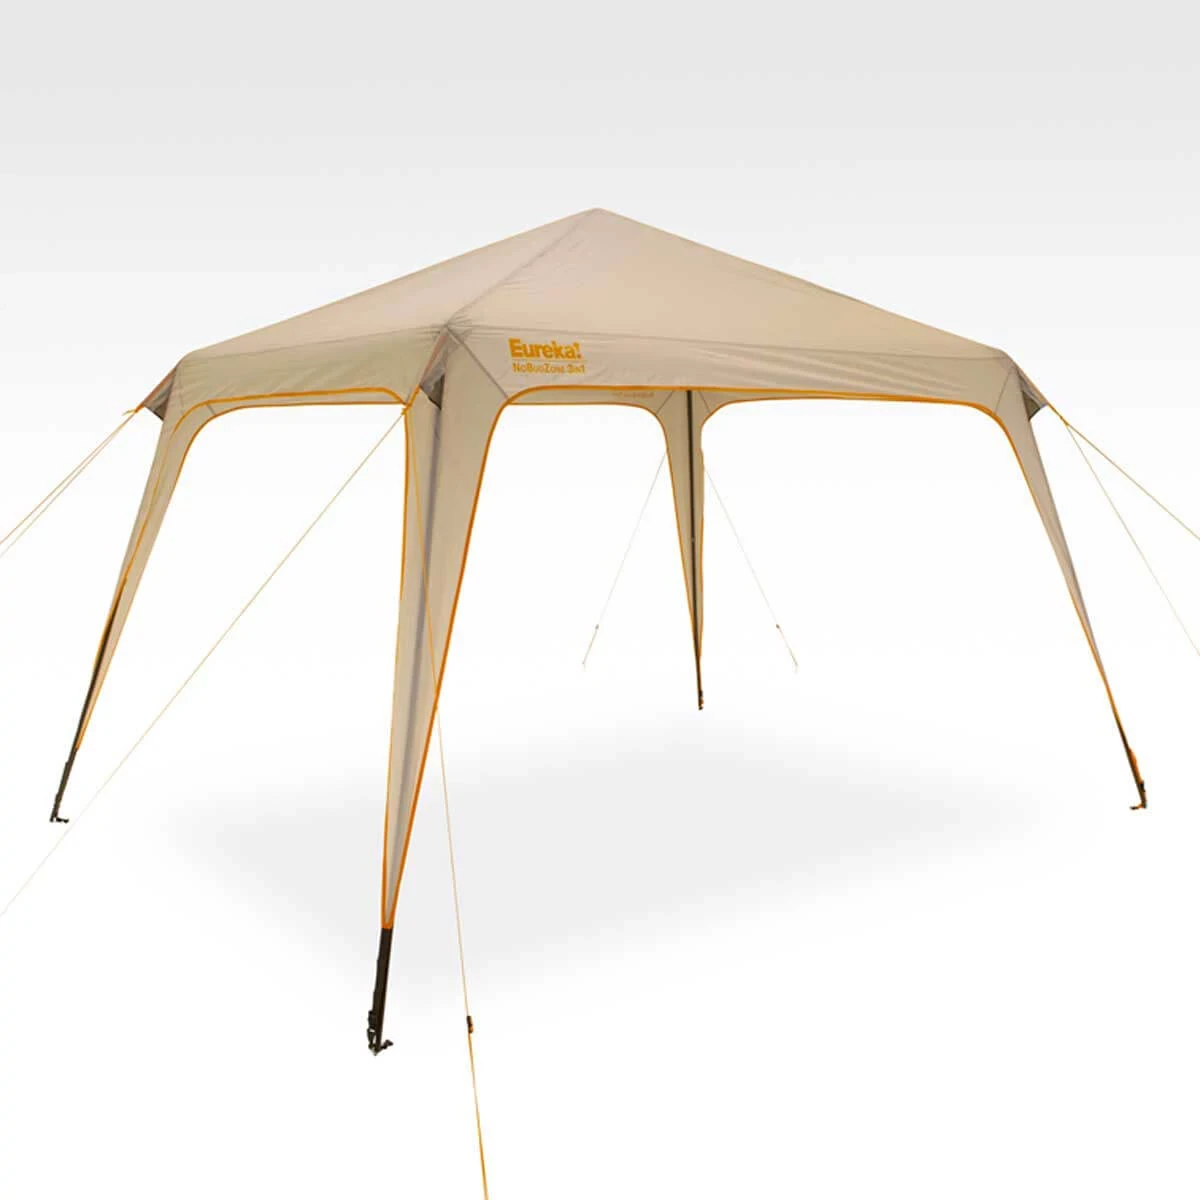 NoBugZone 3-in-1 Awning on its own